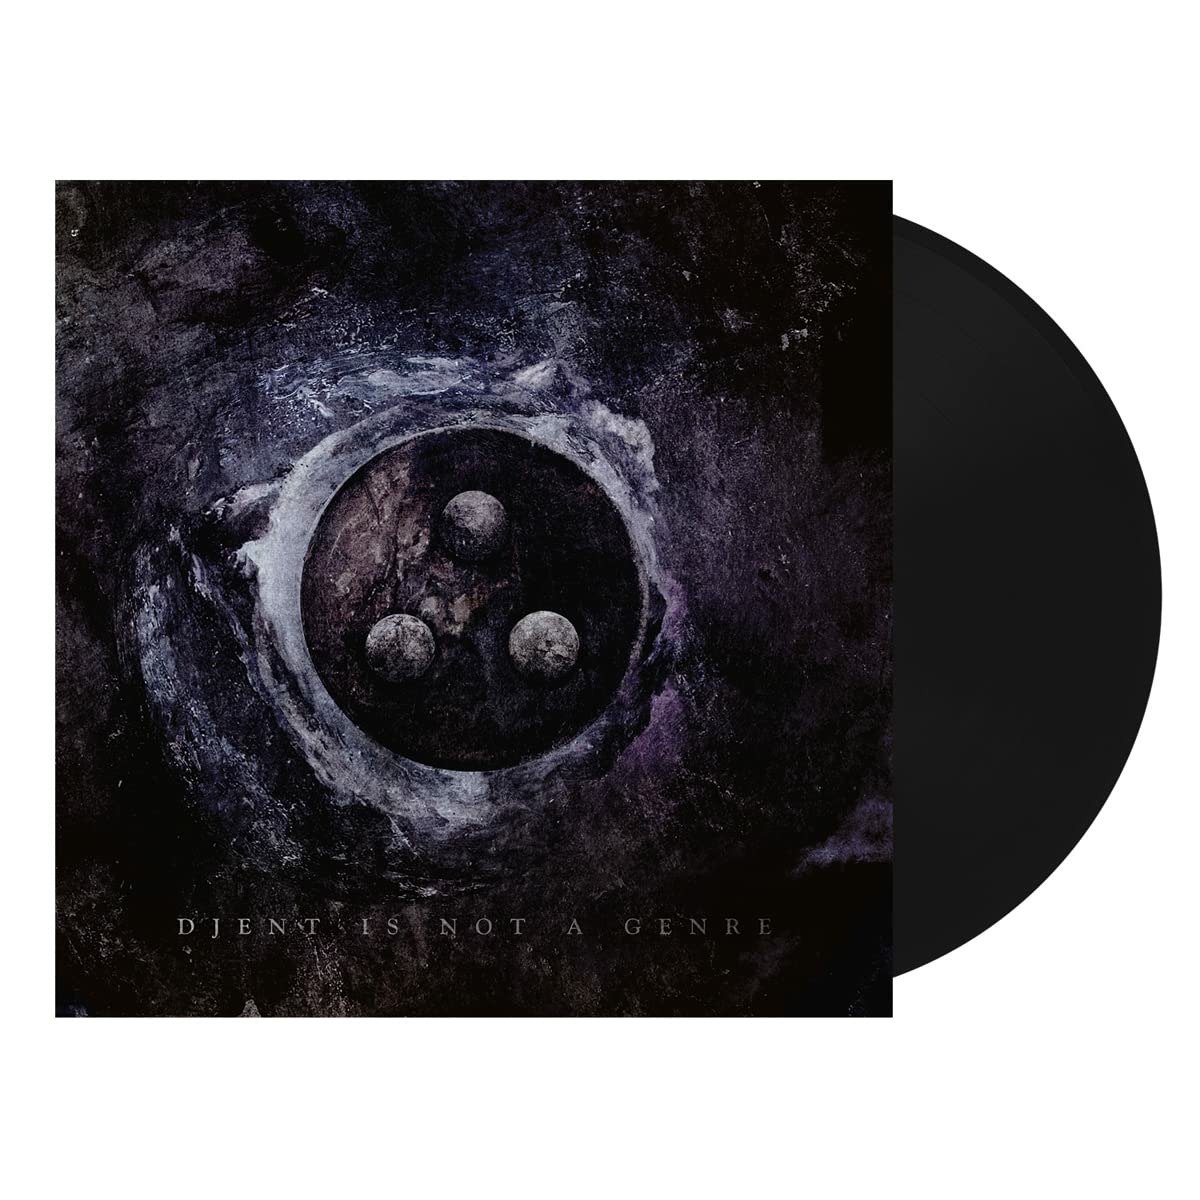 CD Shop - PERIPHERY PERIPHERY V: DJENT IS NOT A GENRE